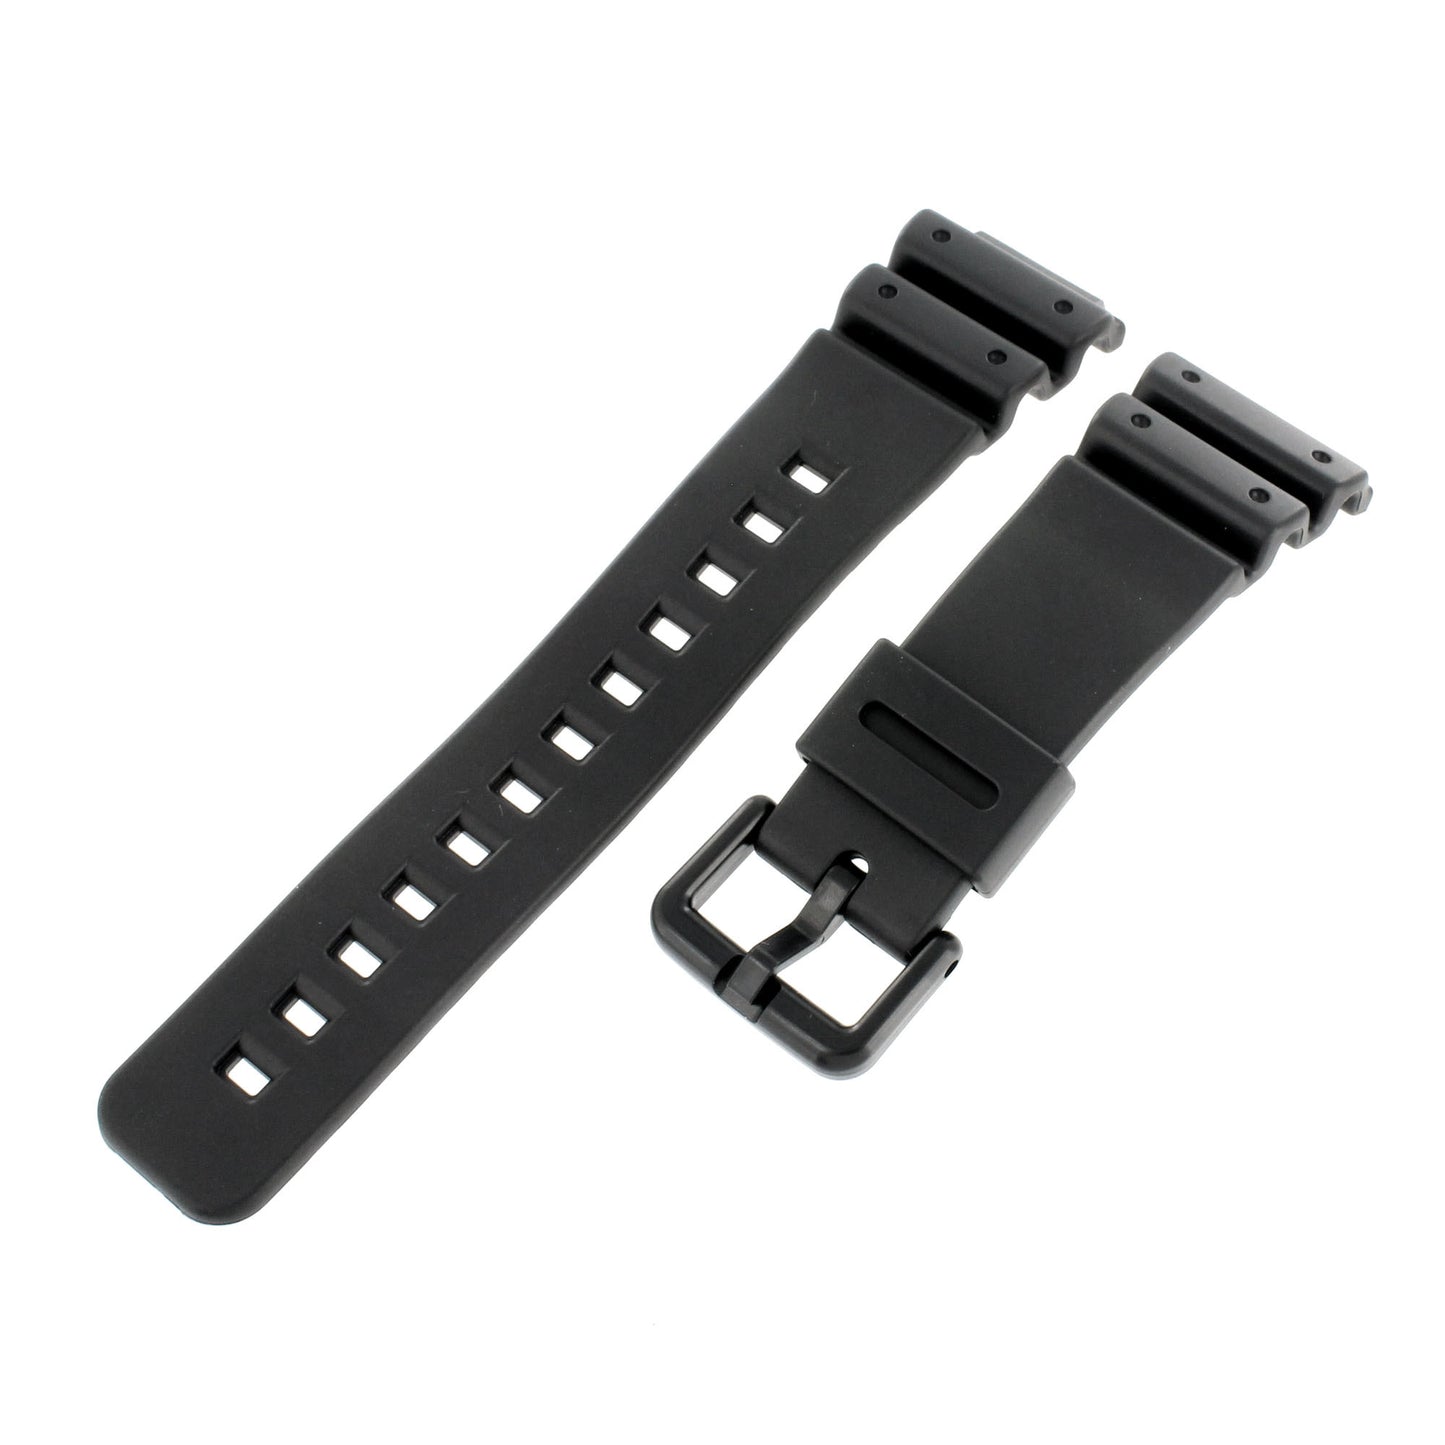 Casio Genuine Replacement Strap Band for G Shock Watch Model Dw6900